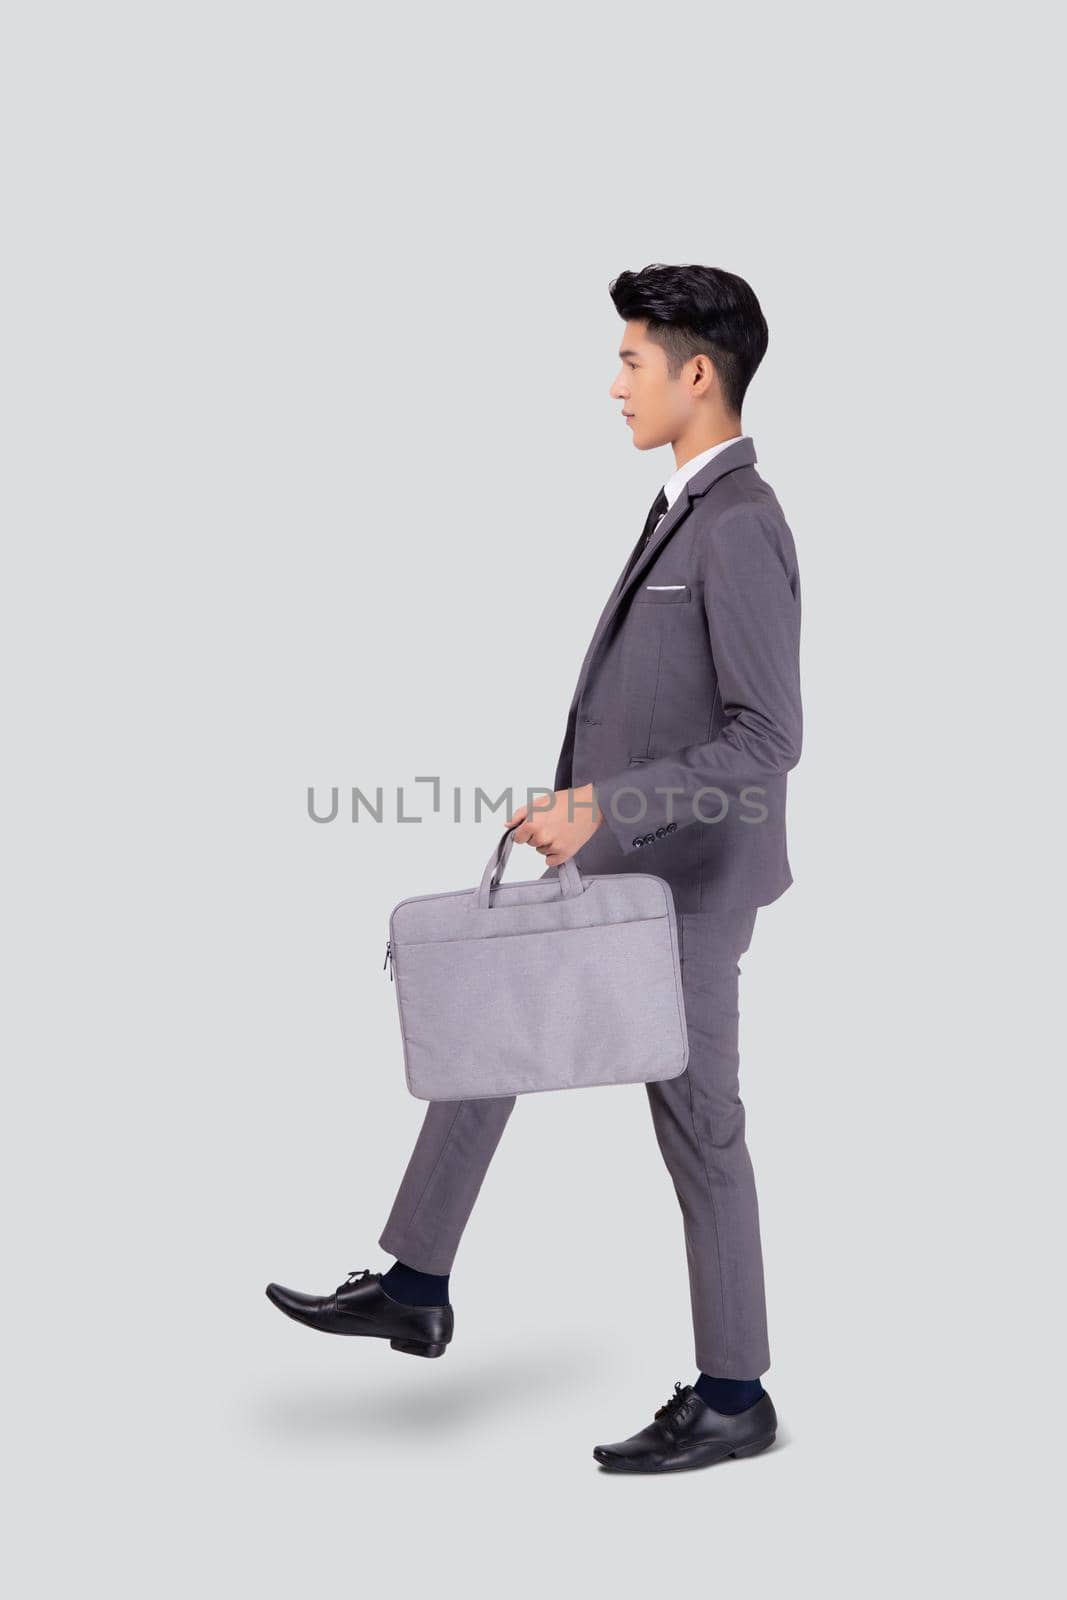 Young asian business man in suit walking movement holding bag isolated on white background, portrait of executive or manager, happy businessman holding briefcase, male with confident for success. by nnudoo